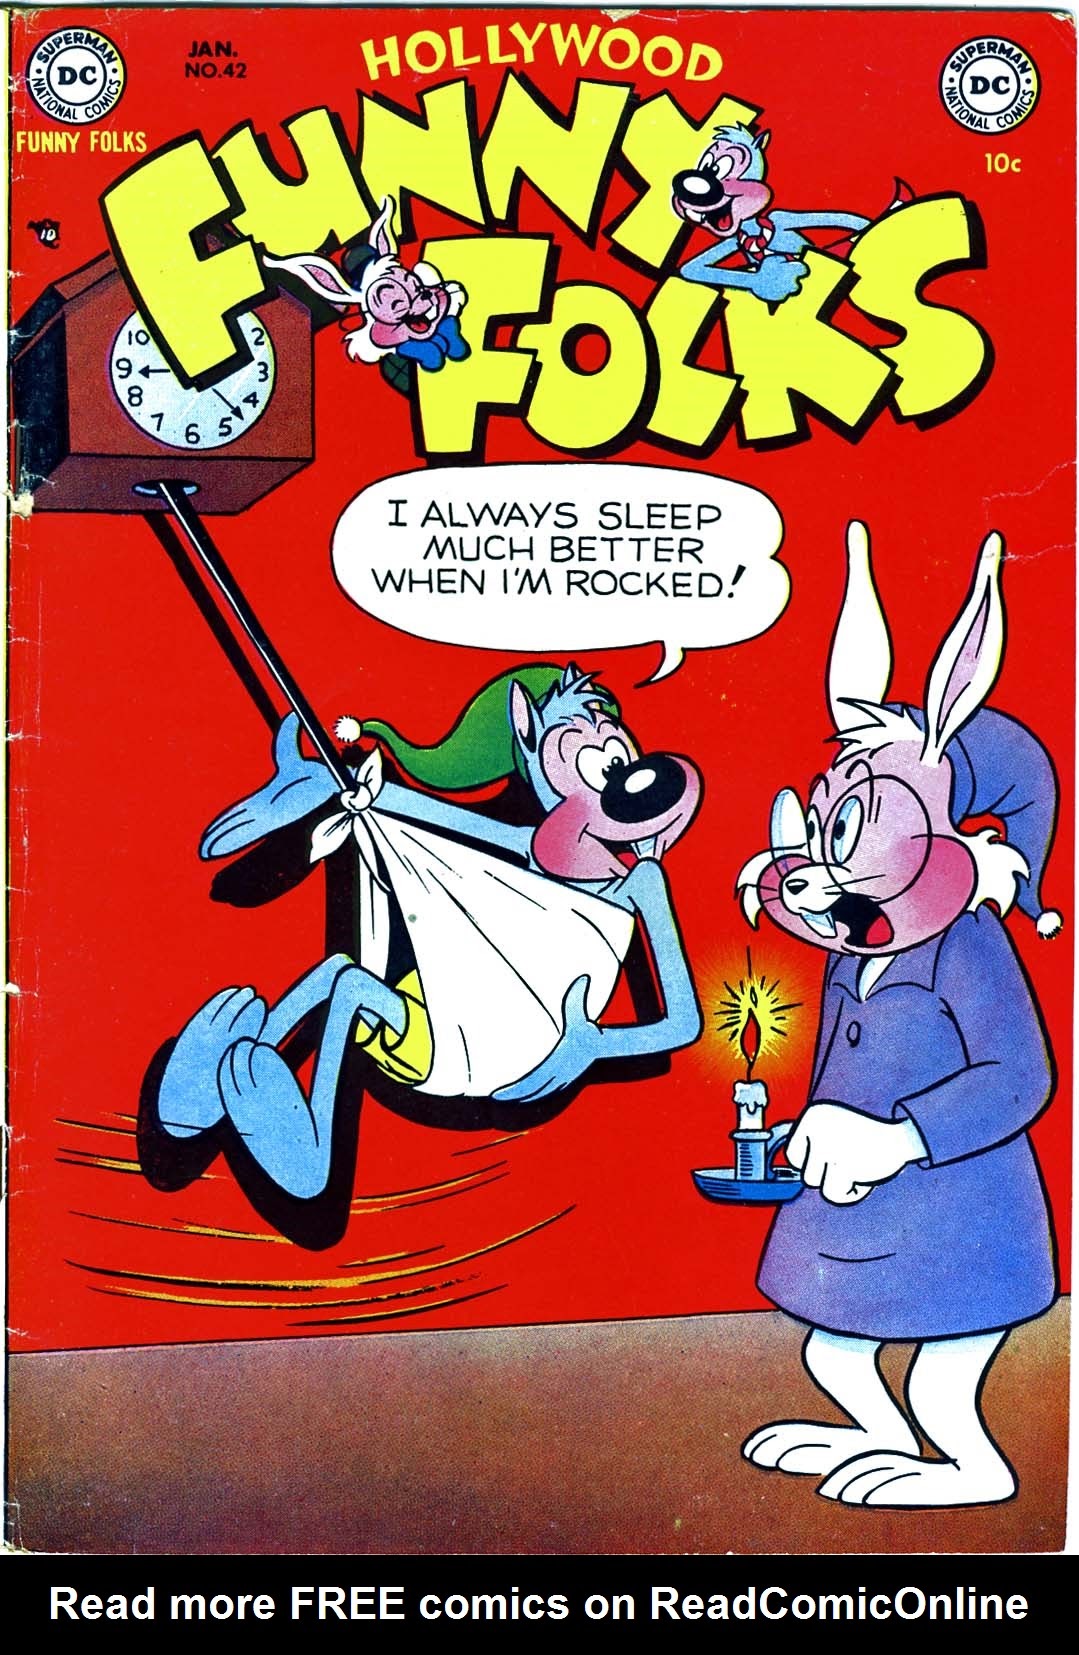 Read online Hollywood Funny Folks comic -  Issue #42 - 1